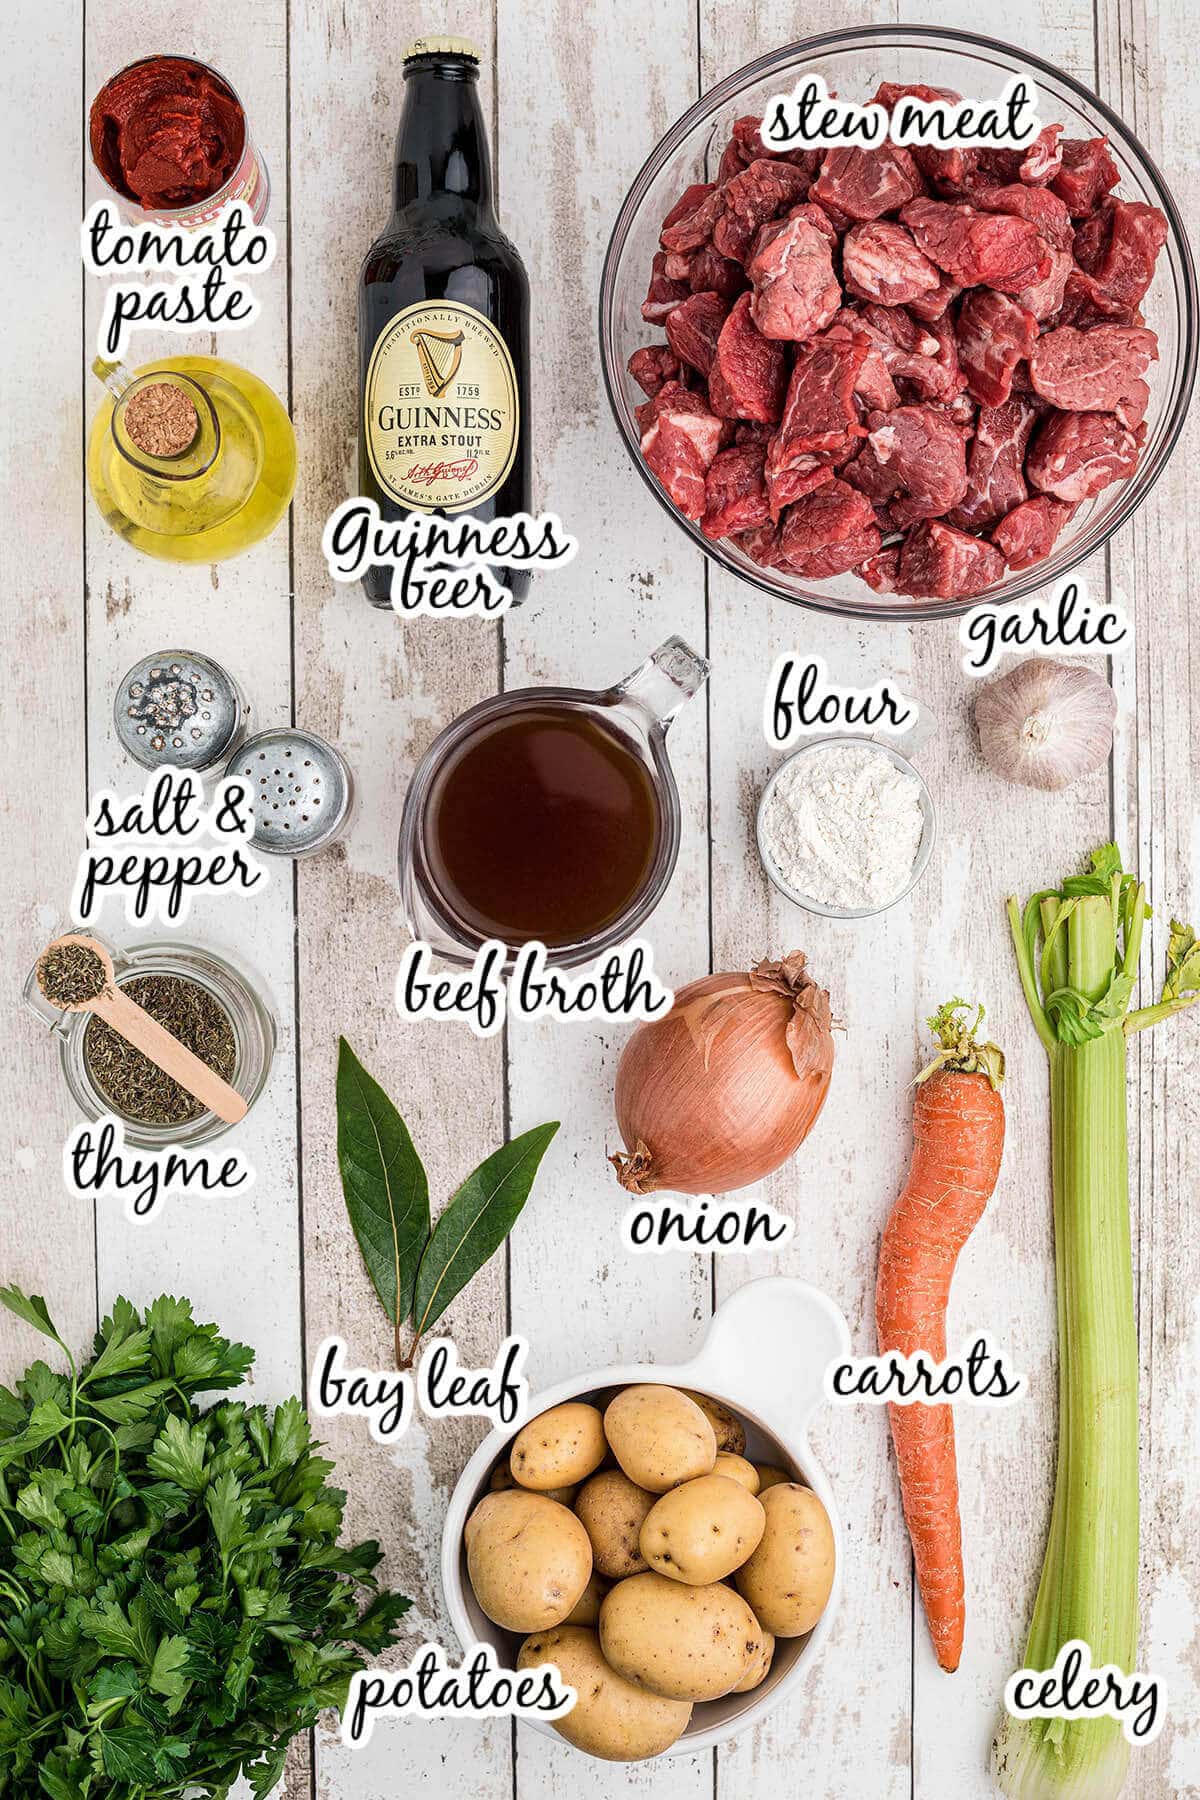 All of the ingredients needed to make the soup recipe. With print overlay.